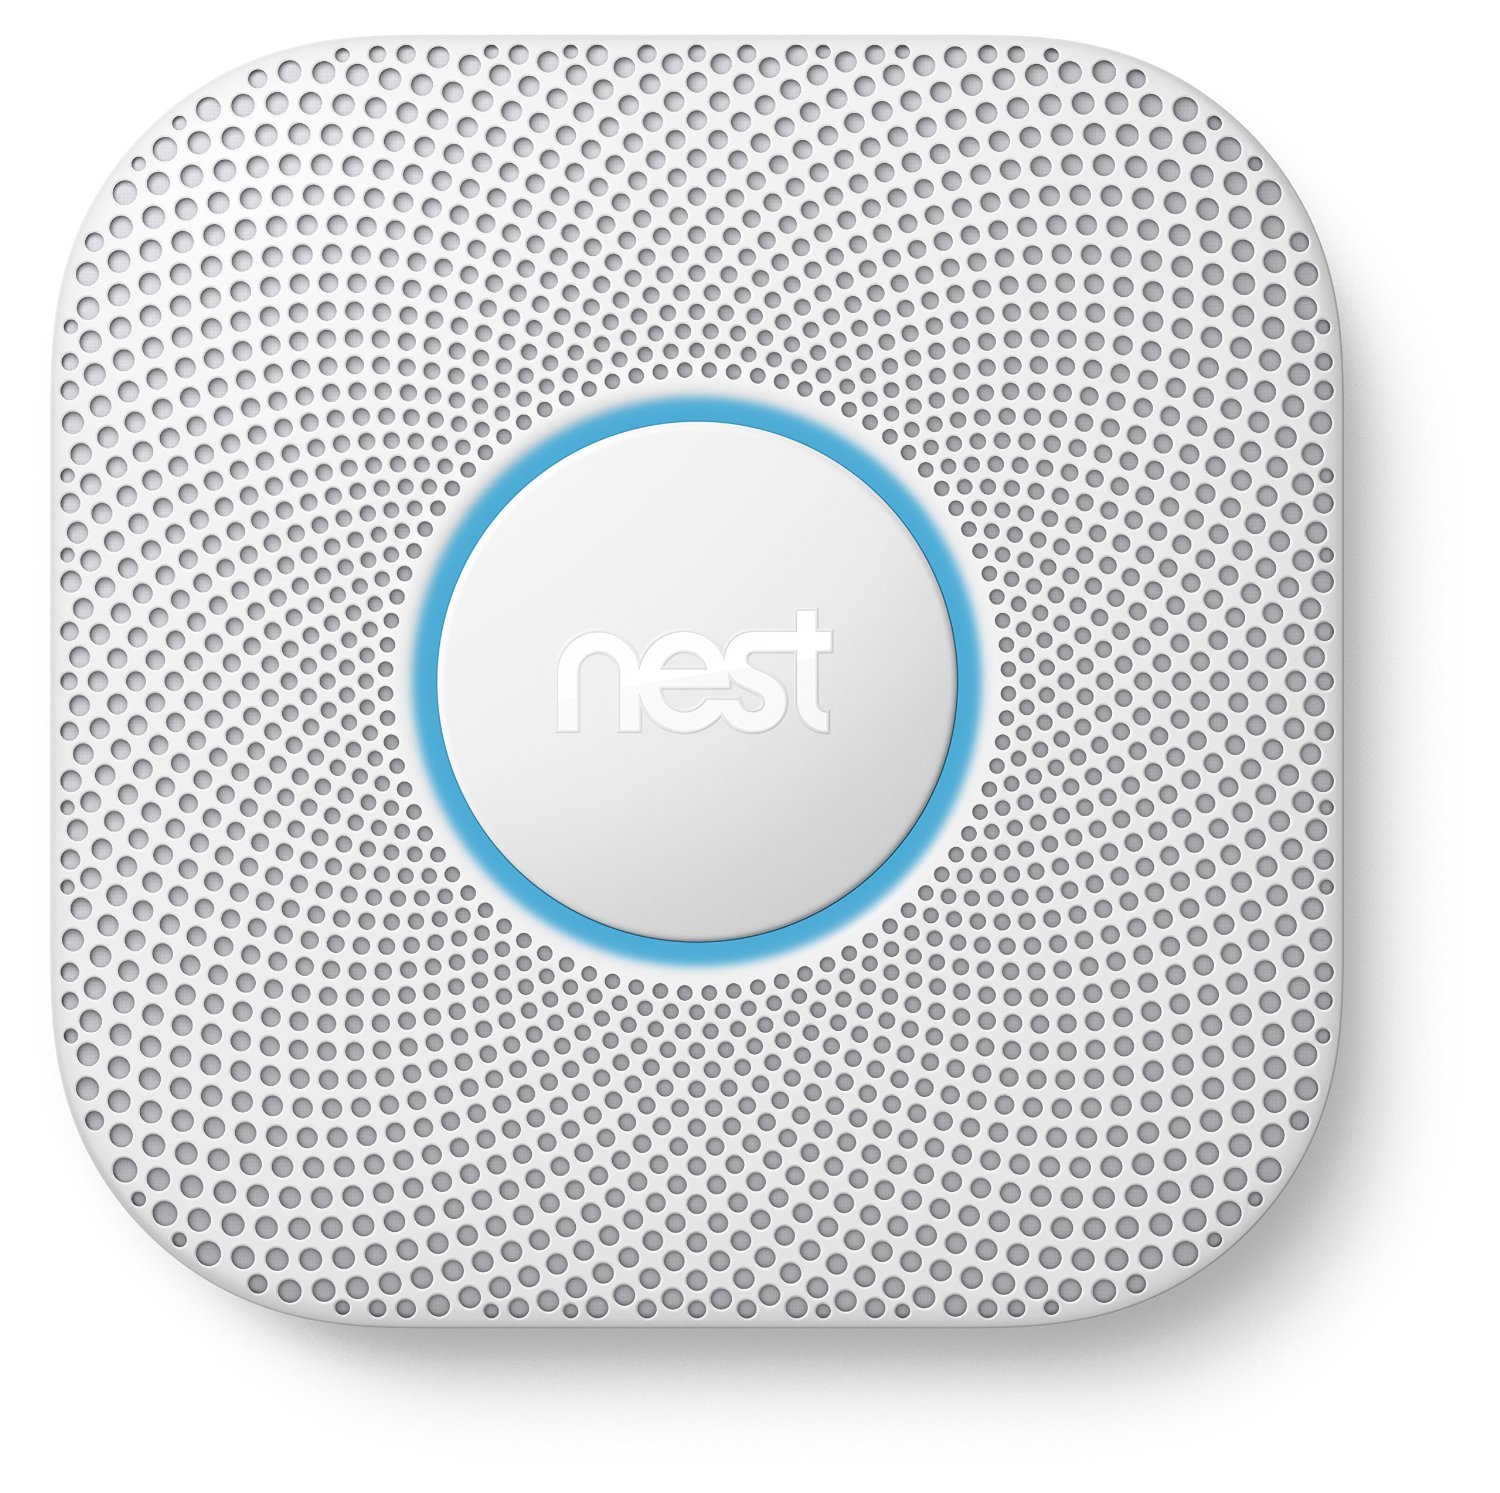 Nest protect